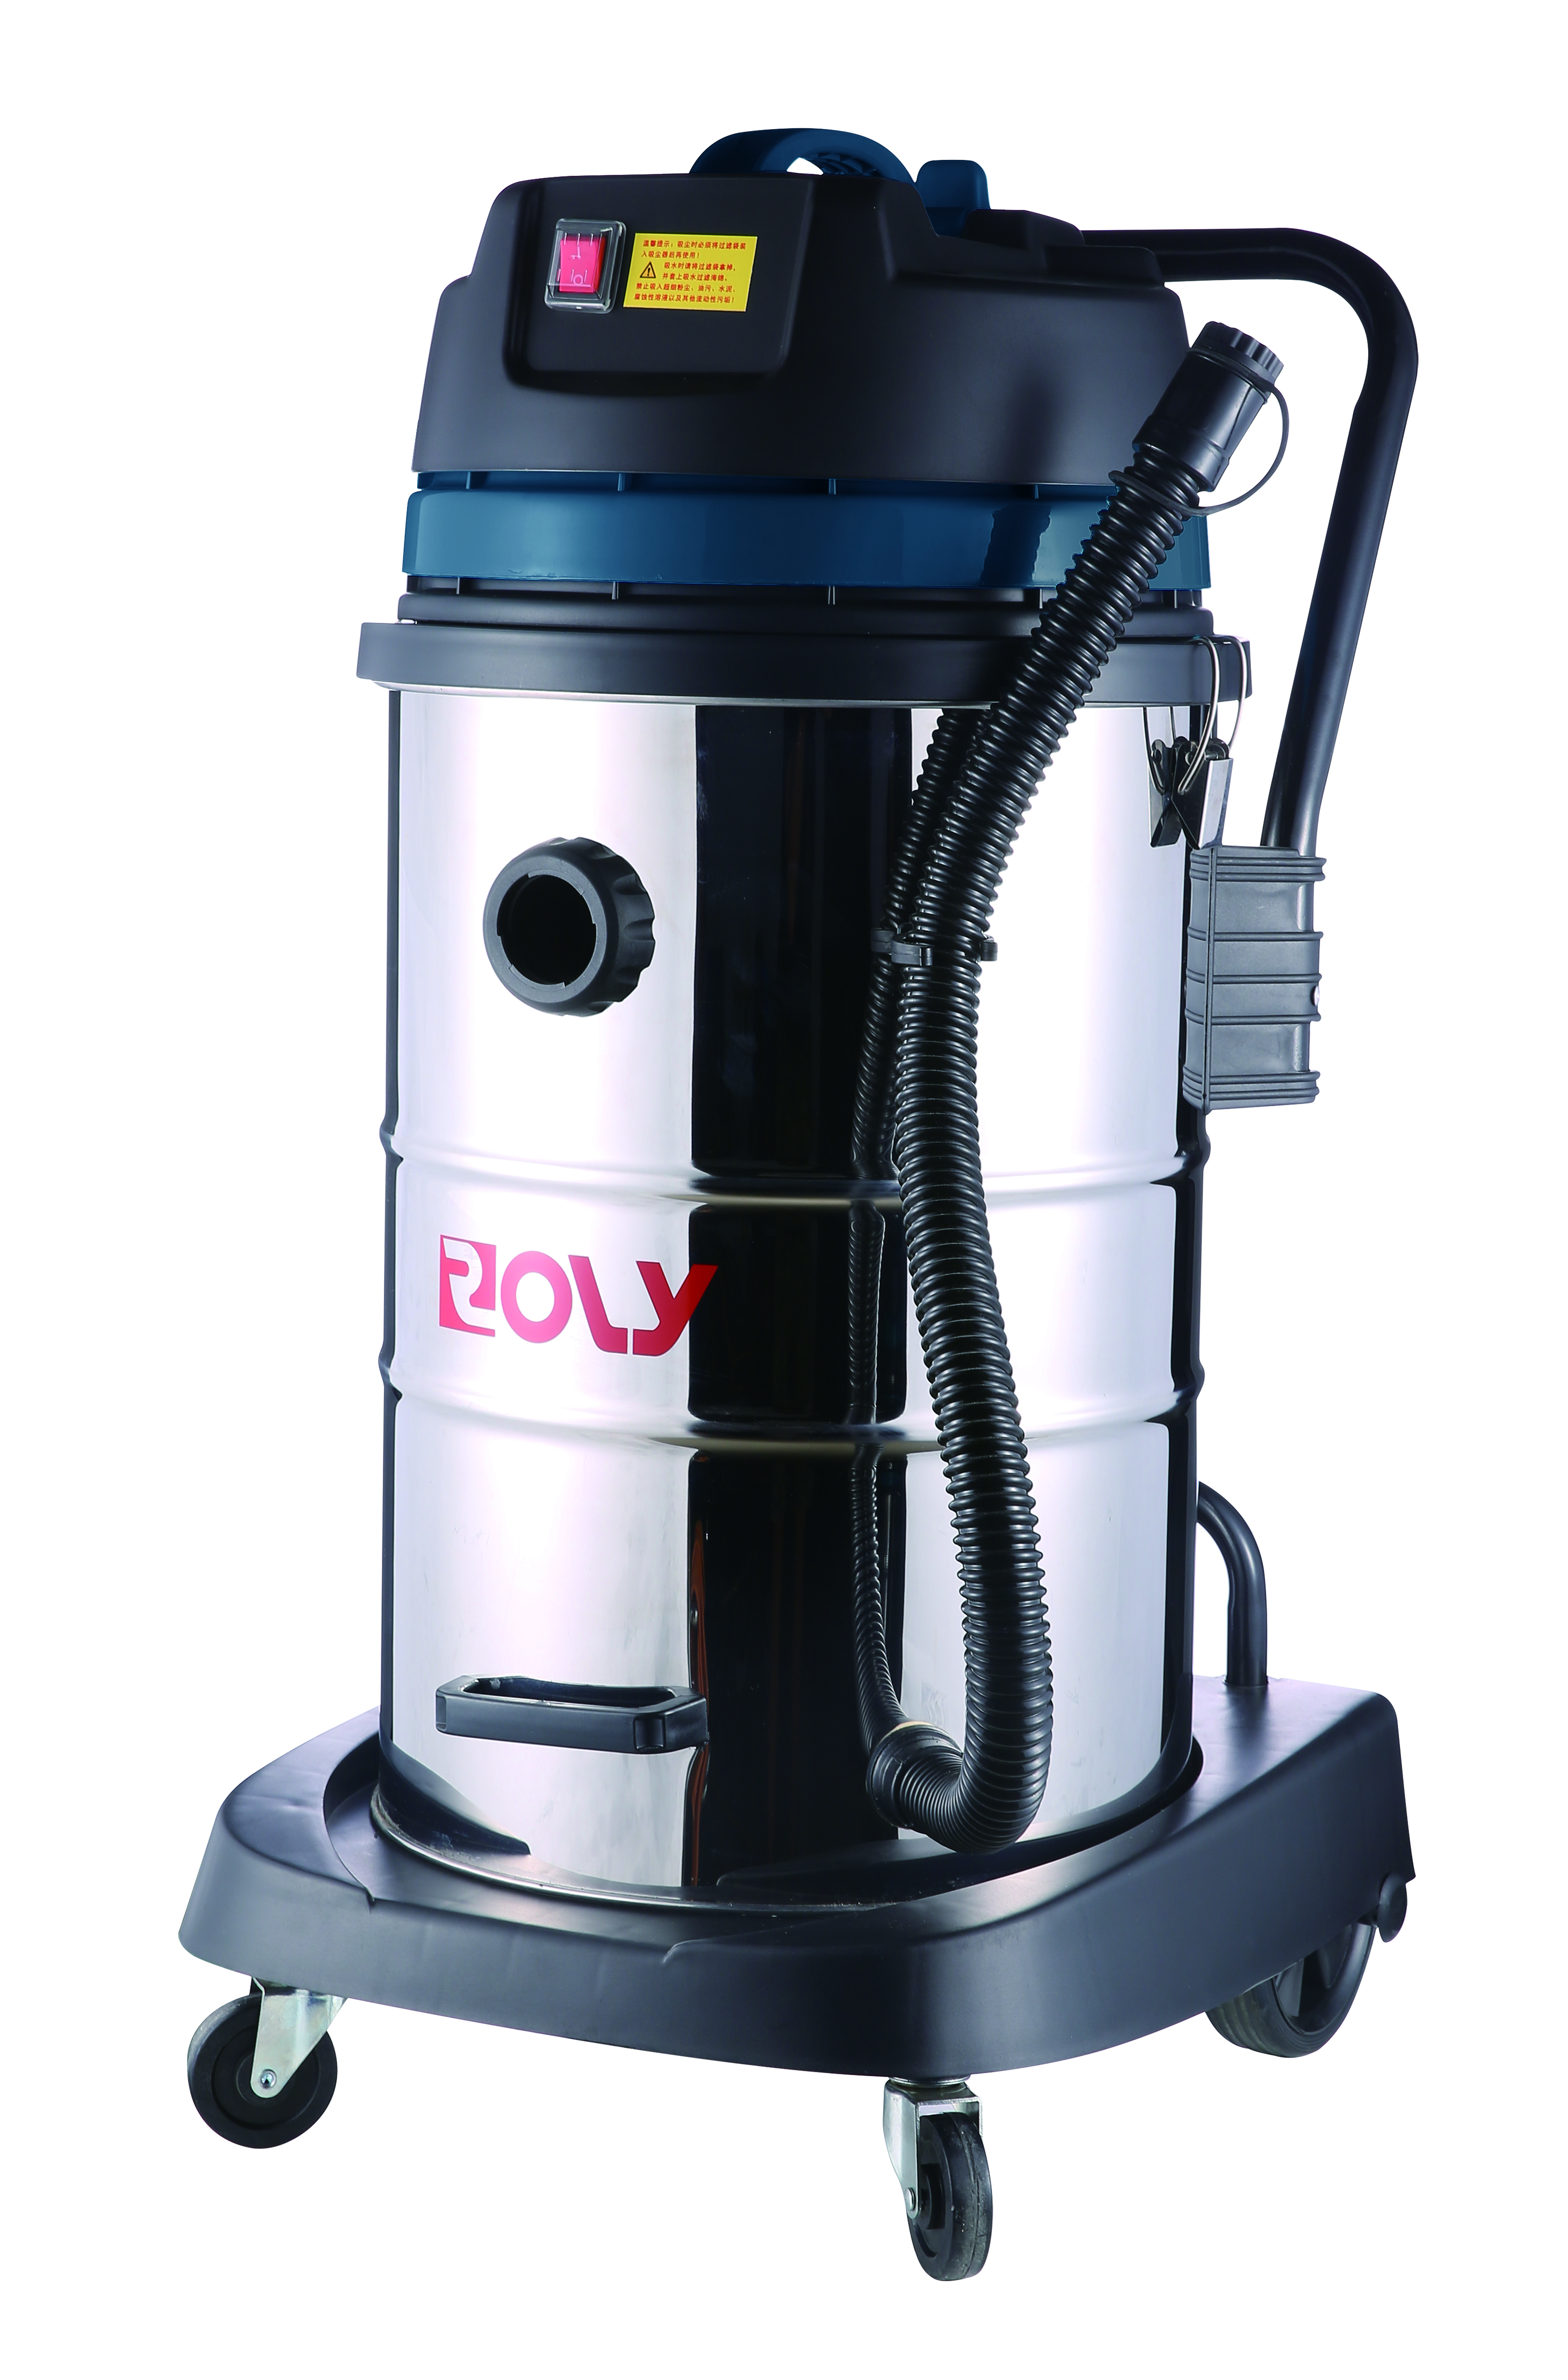 WL098 2020 new design commercial industrial wet dry vacuum cleaner